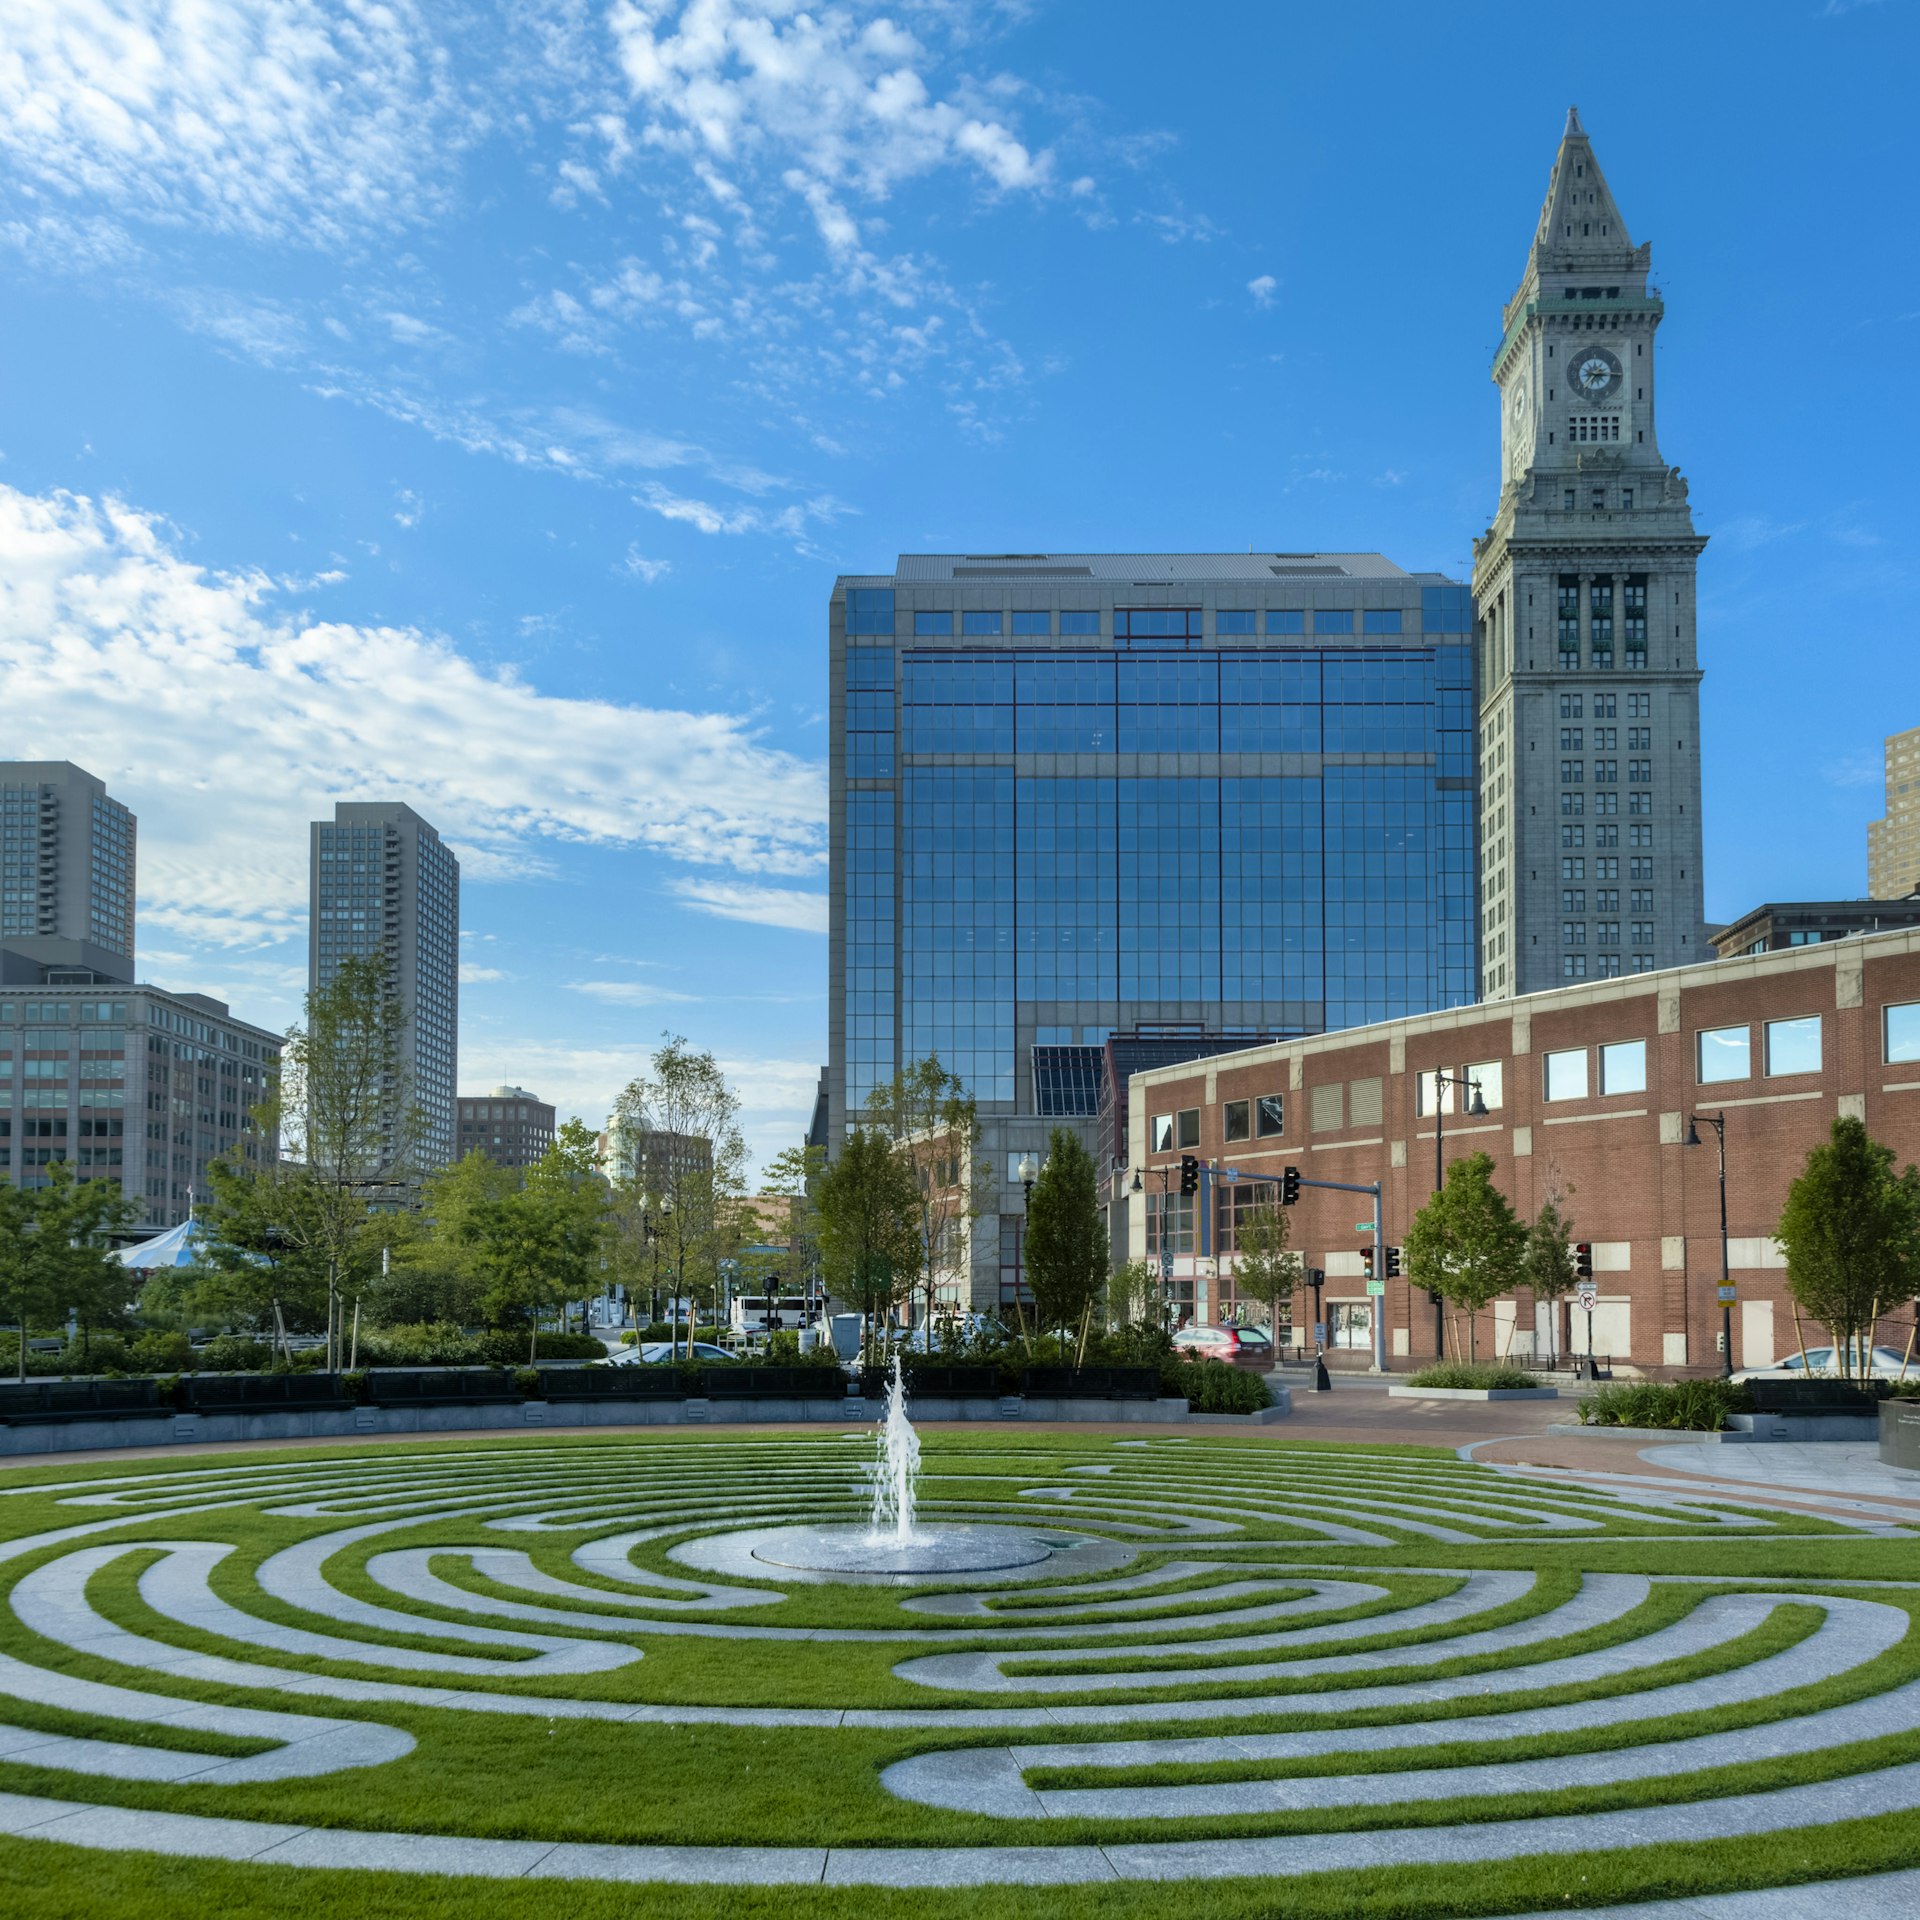 A labyrinth with a fountain in the middle of it and a city skyline in the background